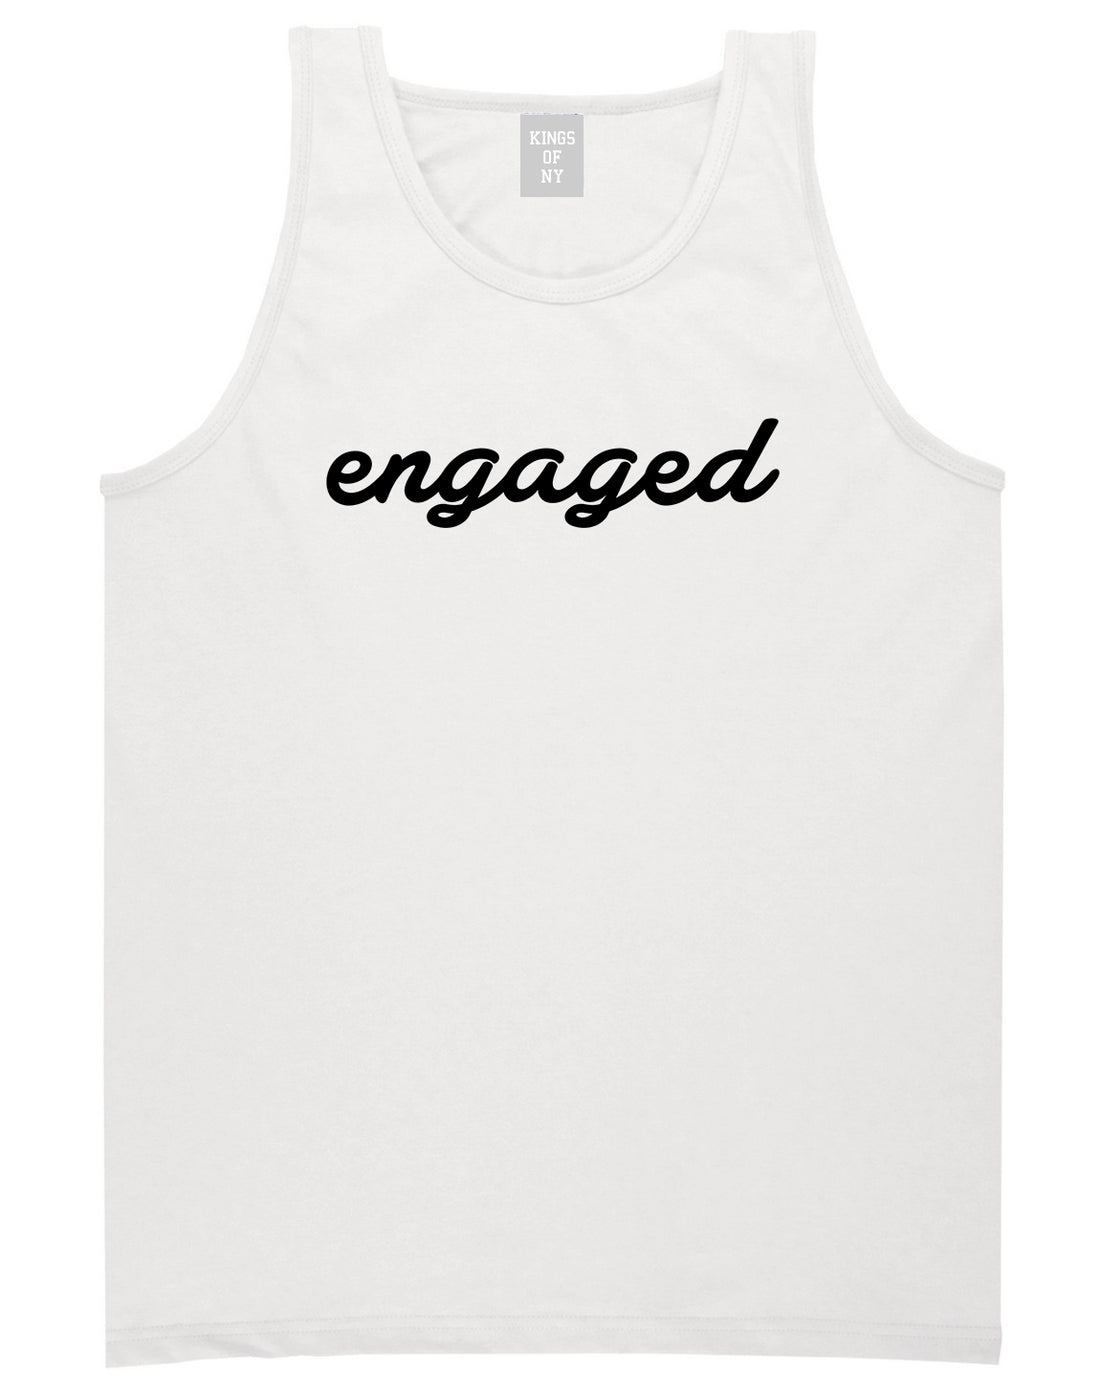 Engaged_Script Mens White Tank Top Shirt by Kings Of NY